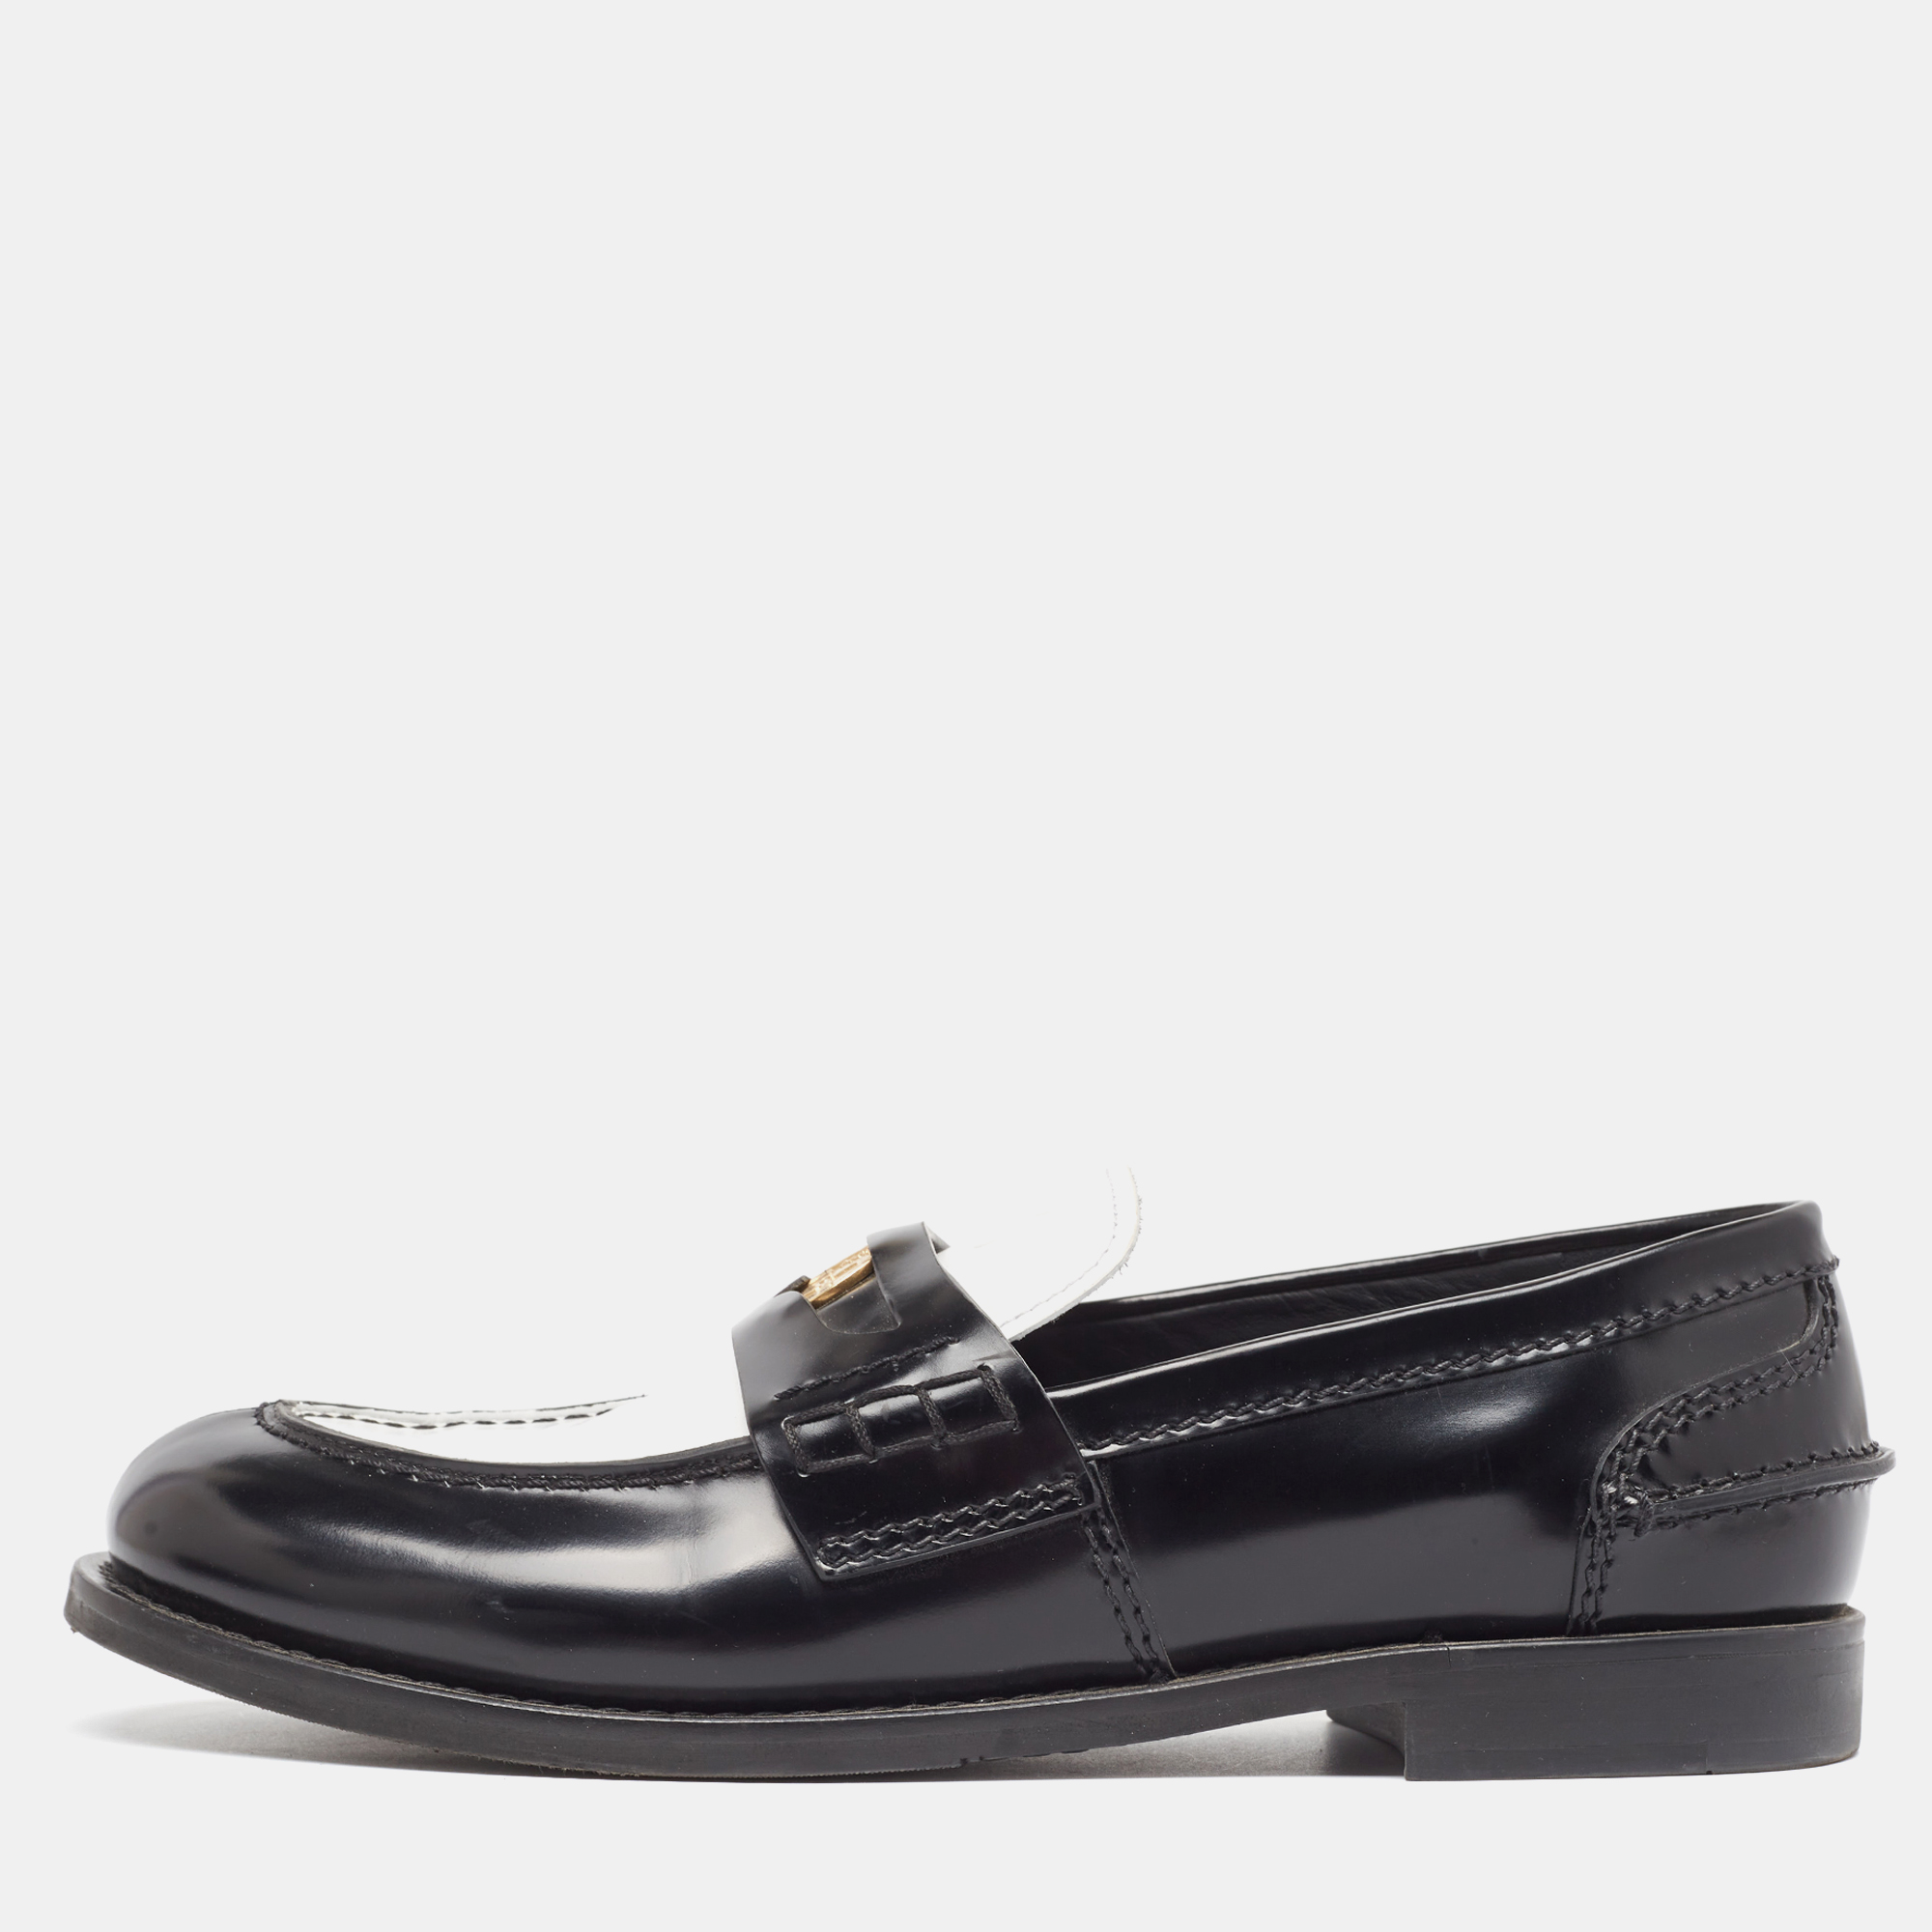 

Miu Miu Black/White Patent Leather Coin Penny Loafers Size